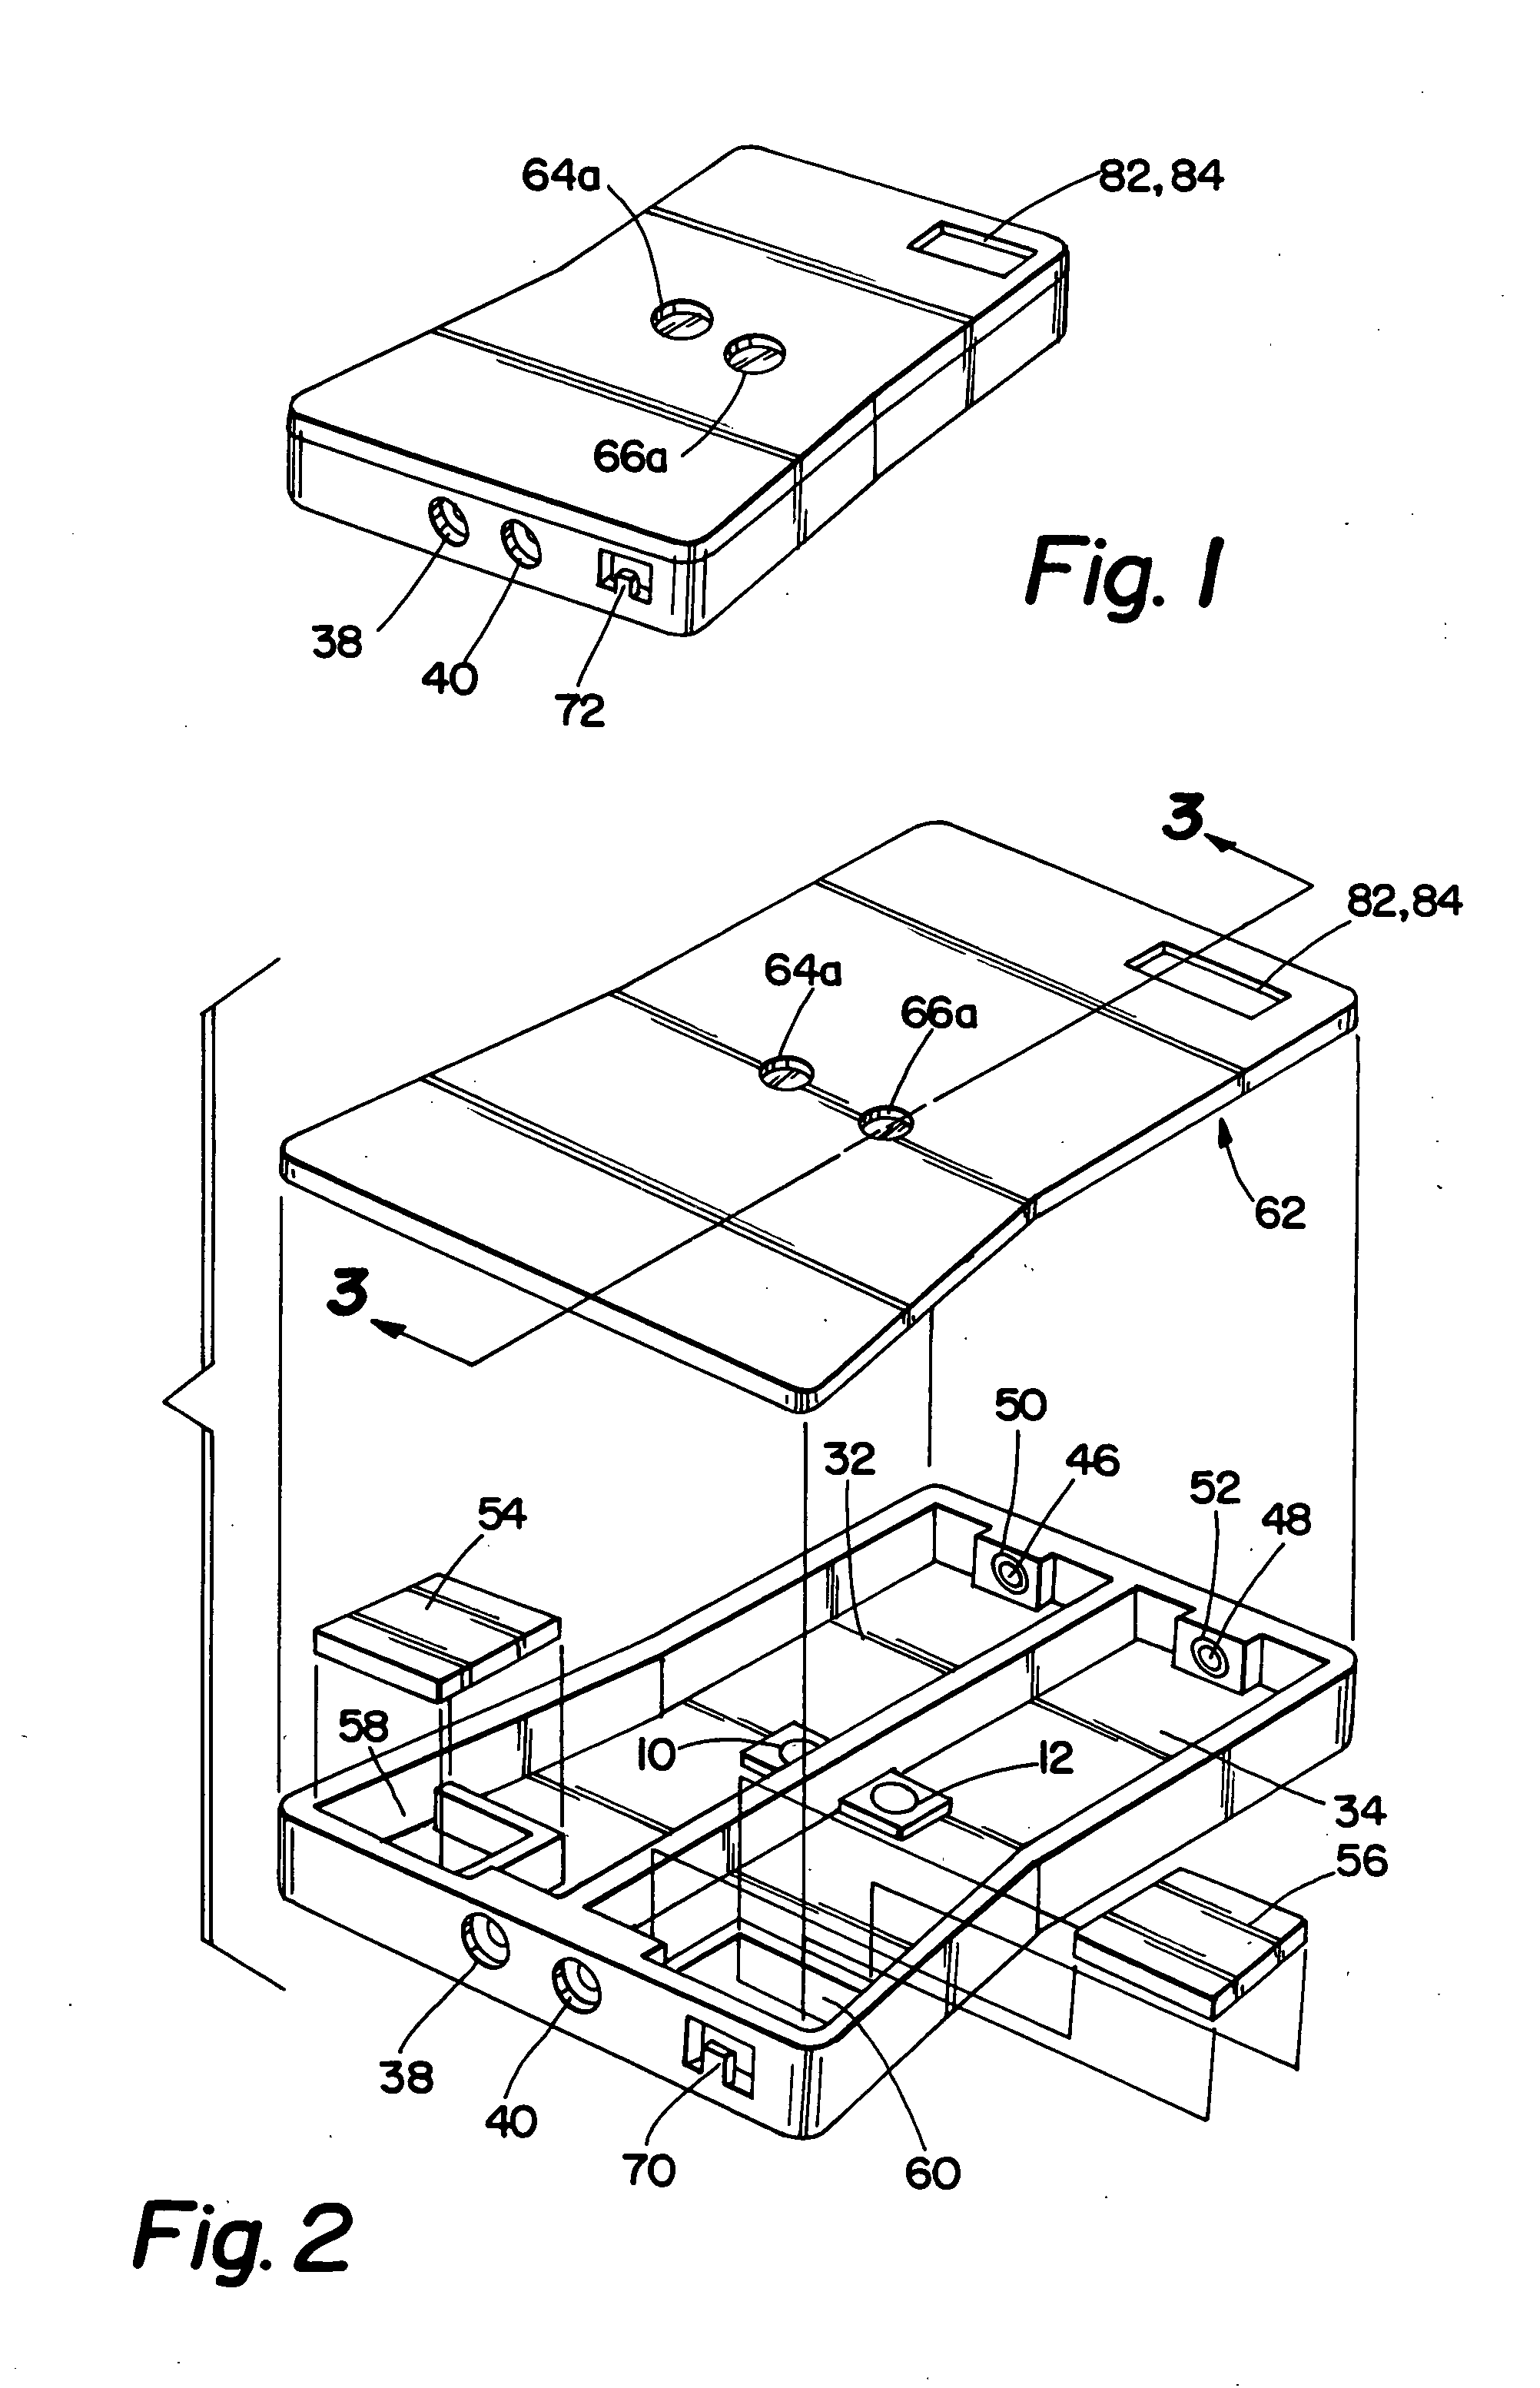 Disposable sensor for use in measuring an analyte in a gaseous sample